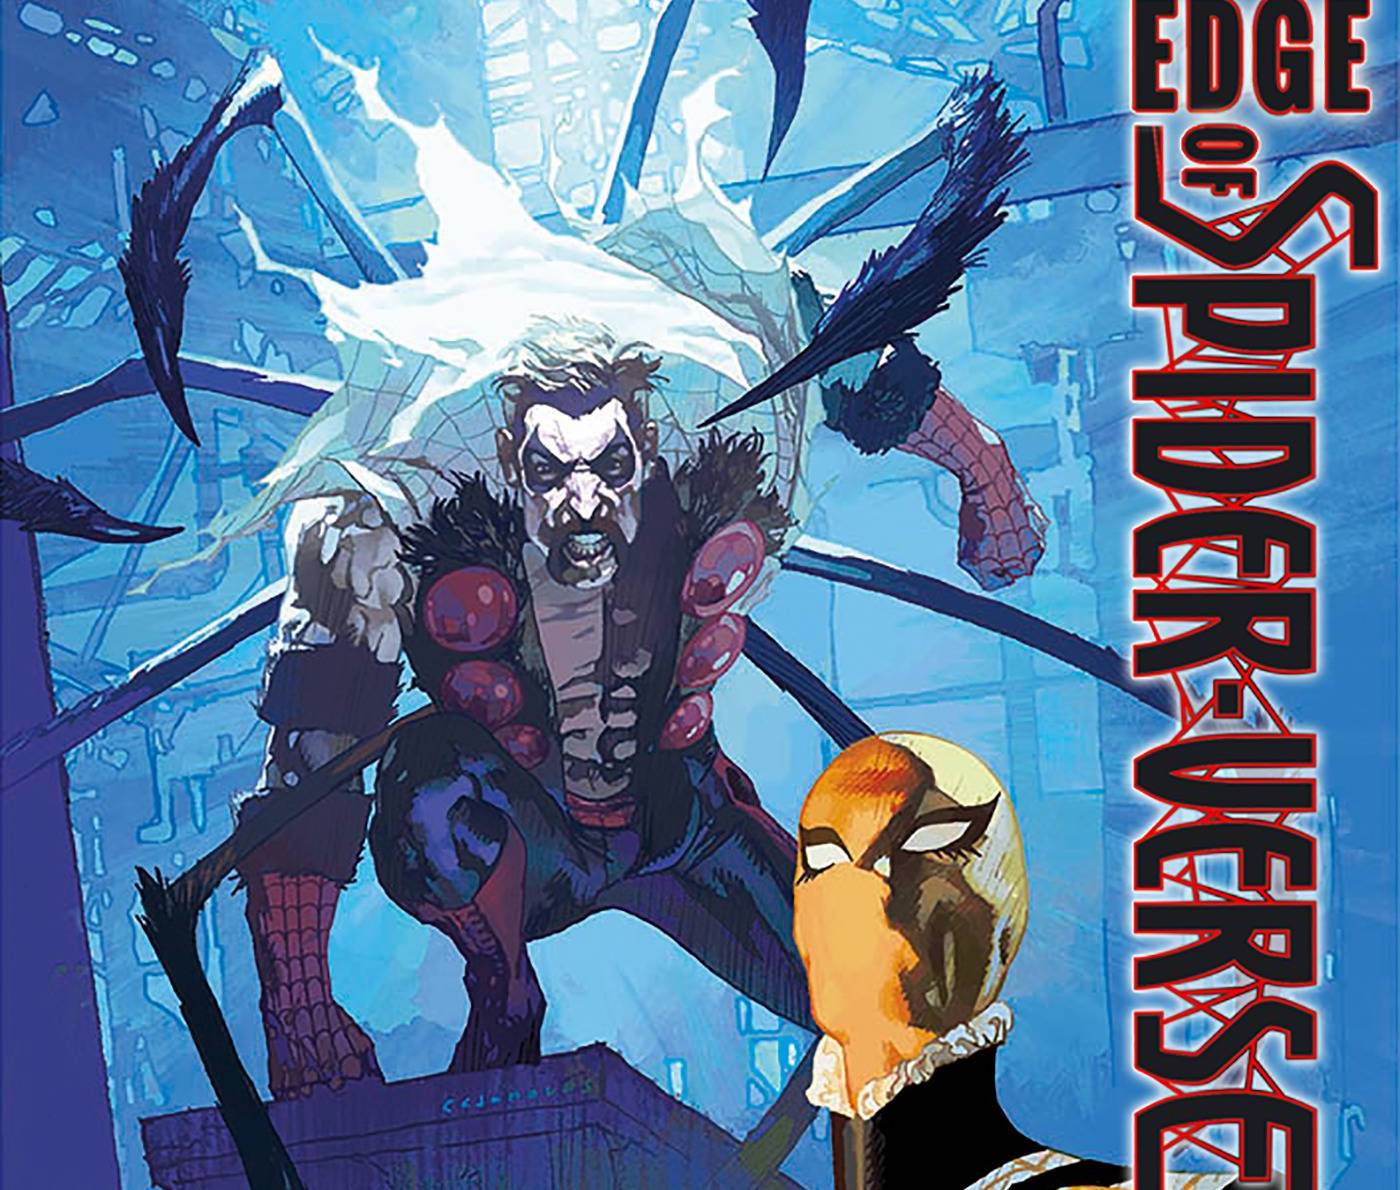 EXCLUSIVE Marvel Preview: Edge of Spider-Verse #5